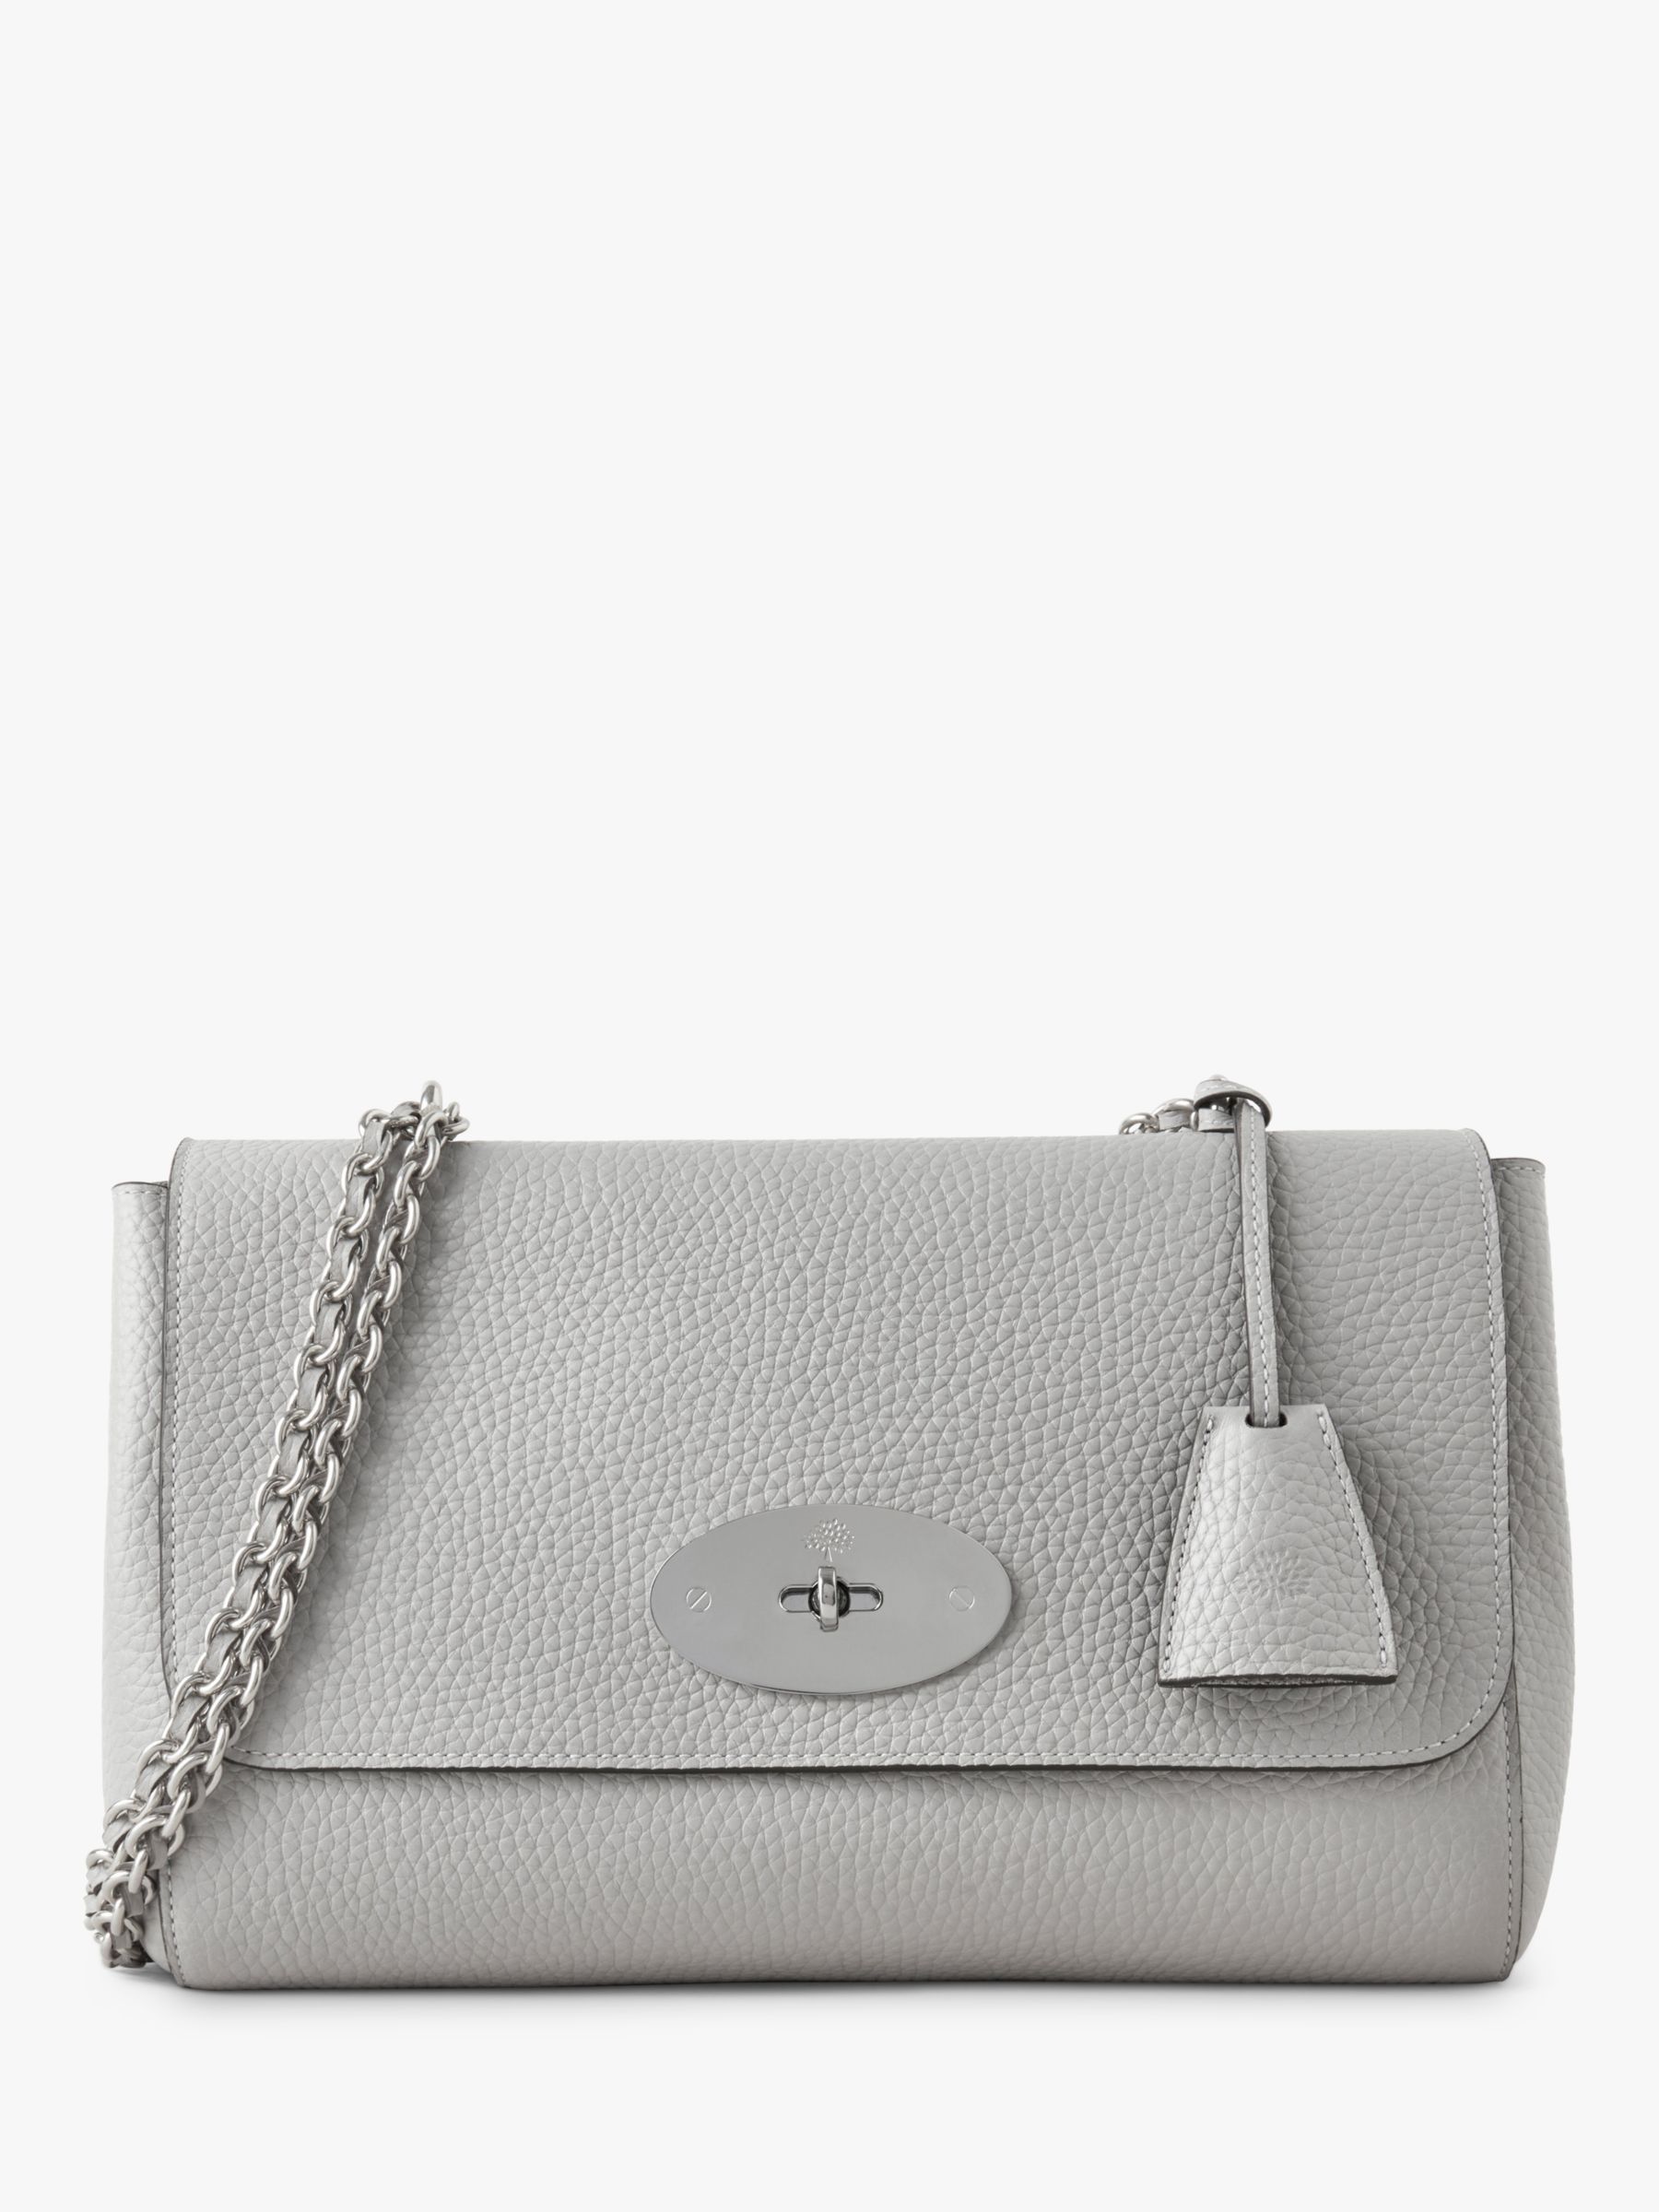 Mulberry Medium Lily Heavy Grain Leather Shoulder Bag, Pale Grey at ...